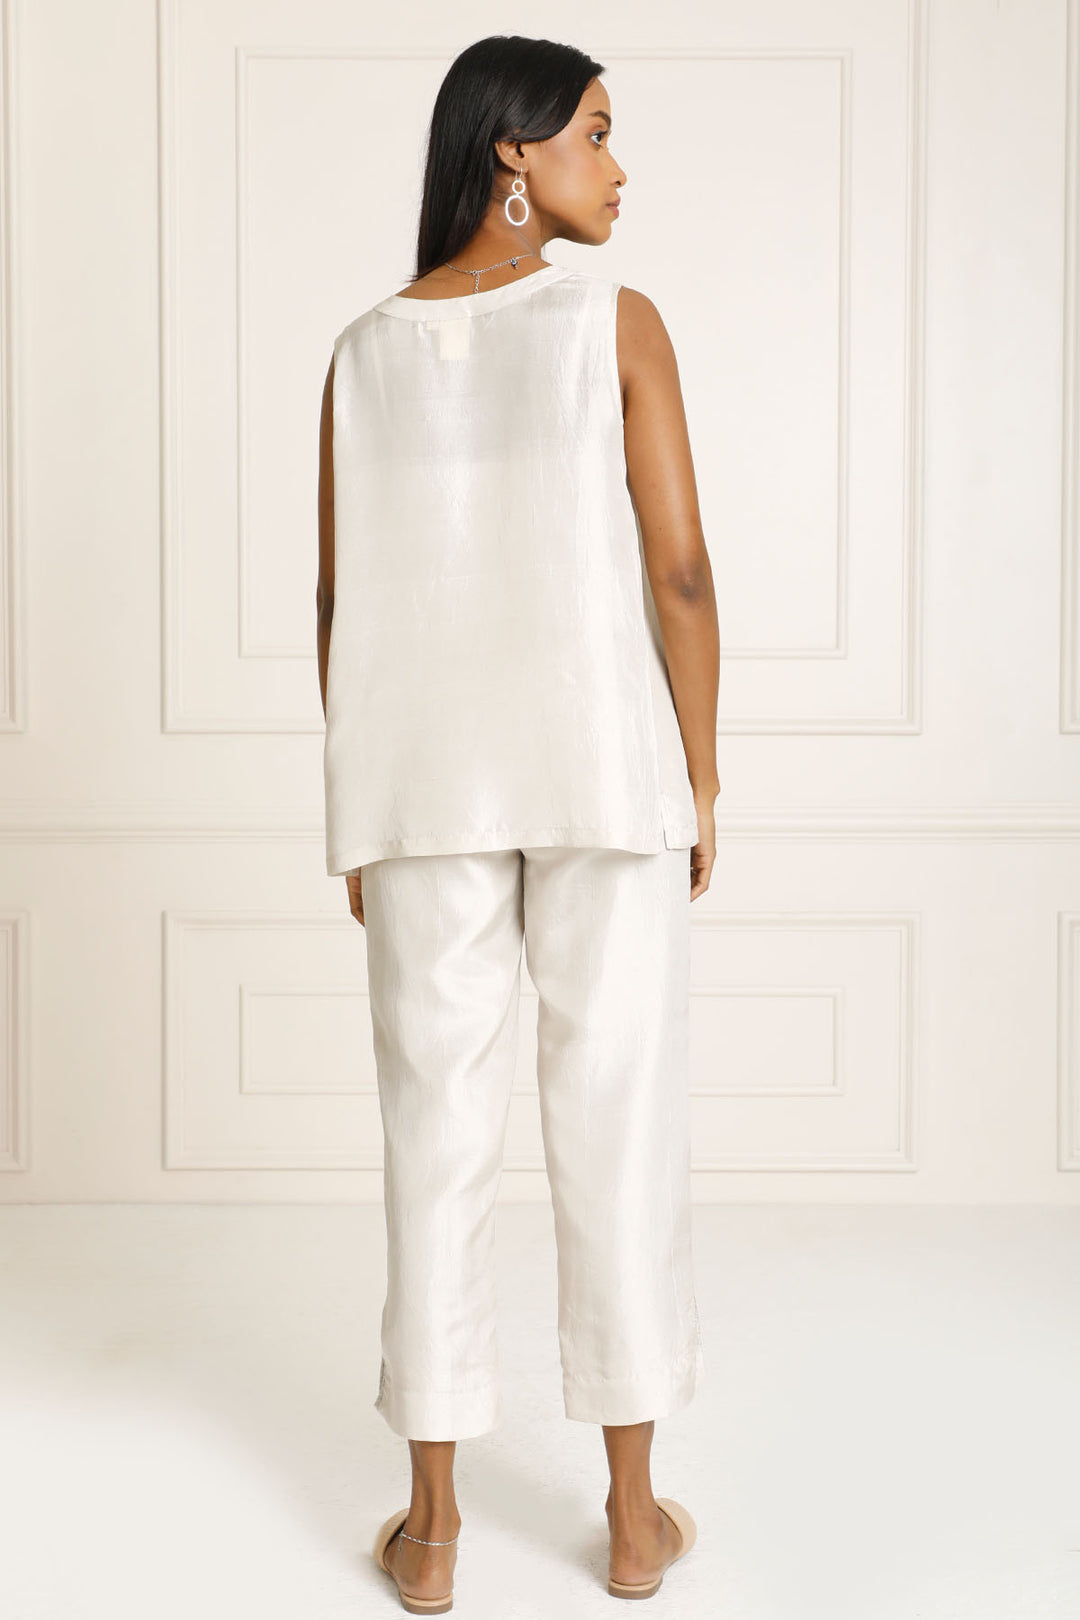 Theia Boat Neck Co-ord Set